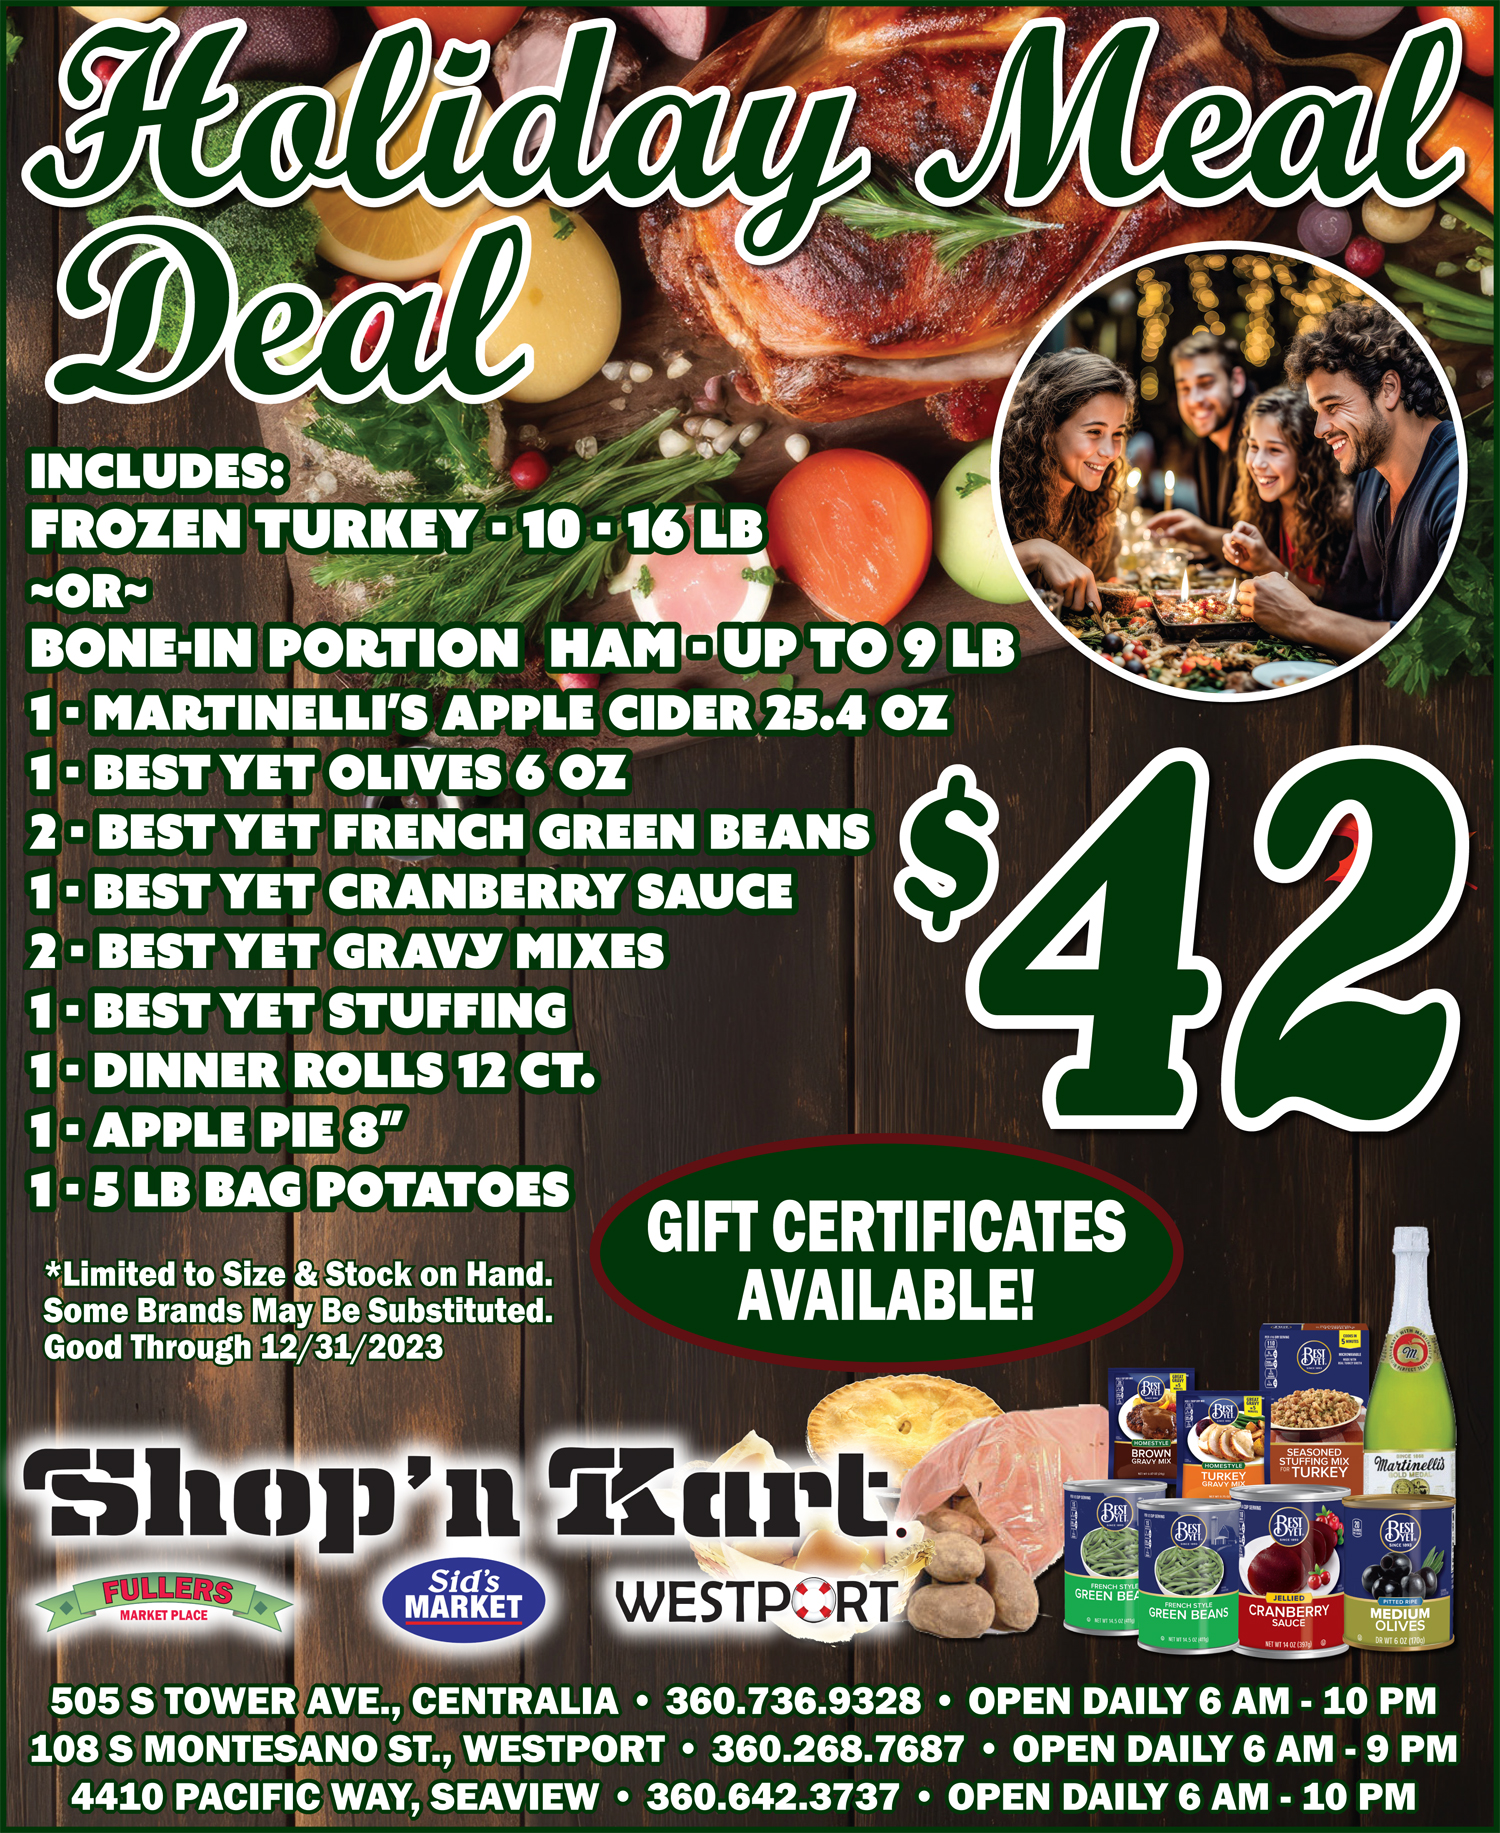 Holiday meal deal Includes ; frozen turkey - 10 to 16lbs or bone in portion ham up to 9lbs. 1 Martinelli's apple cider 25.4 oz, 1 best yet olives 6 oz, 2 best yet french green beans, 1 best yet cranberry sauce, 2 best yet gravy mixes, 1 best yet stuffing, 1 dinner rolls 12 ct, 1 apple pie 8 inch, 1 5lb bag of potatoes. For $42, Limited to size and stock on hand. Some brands may be substituted. Good through 12/31/2023